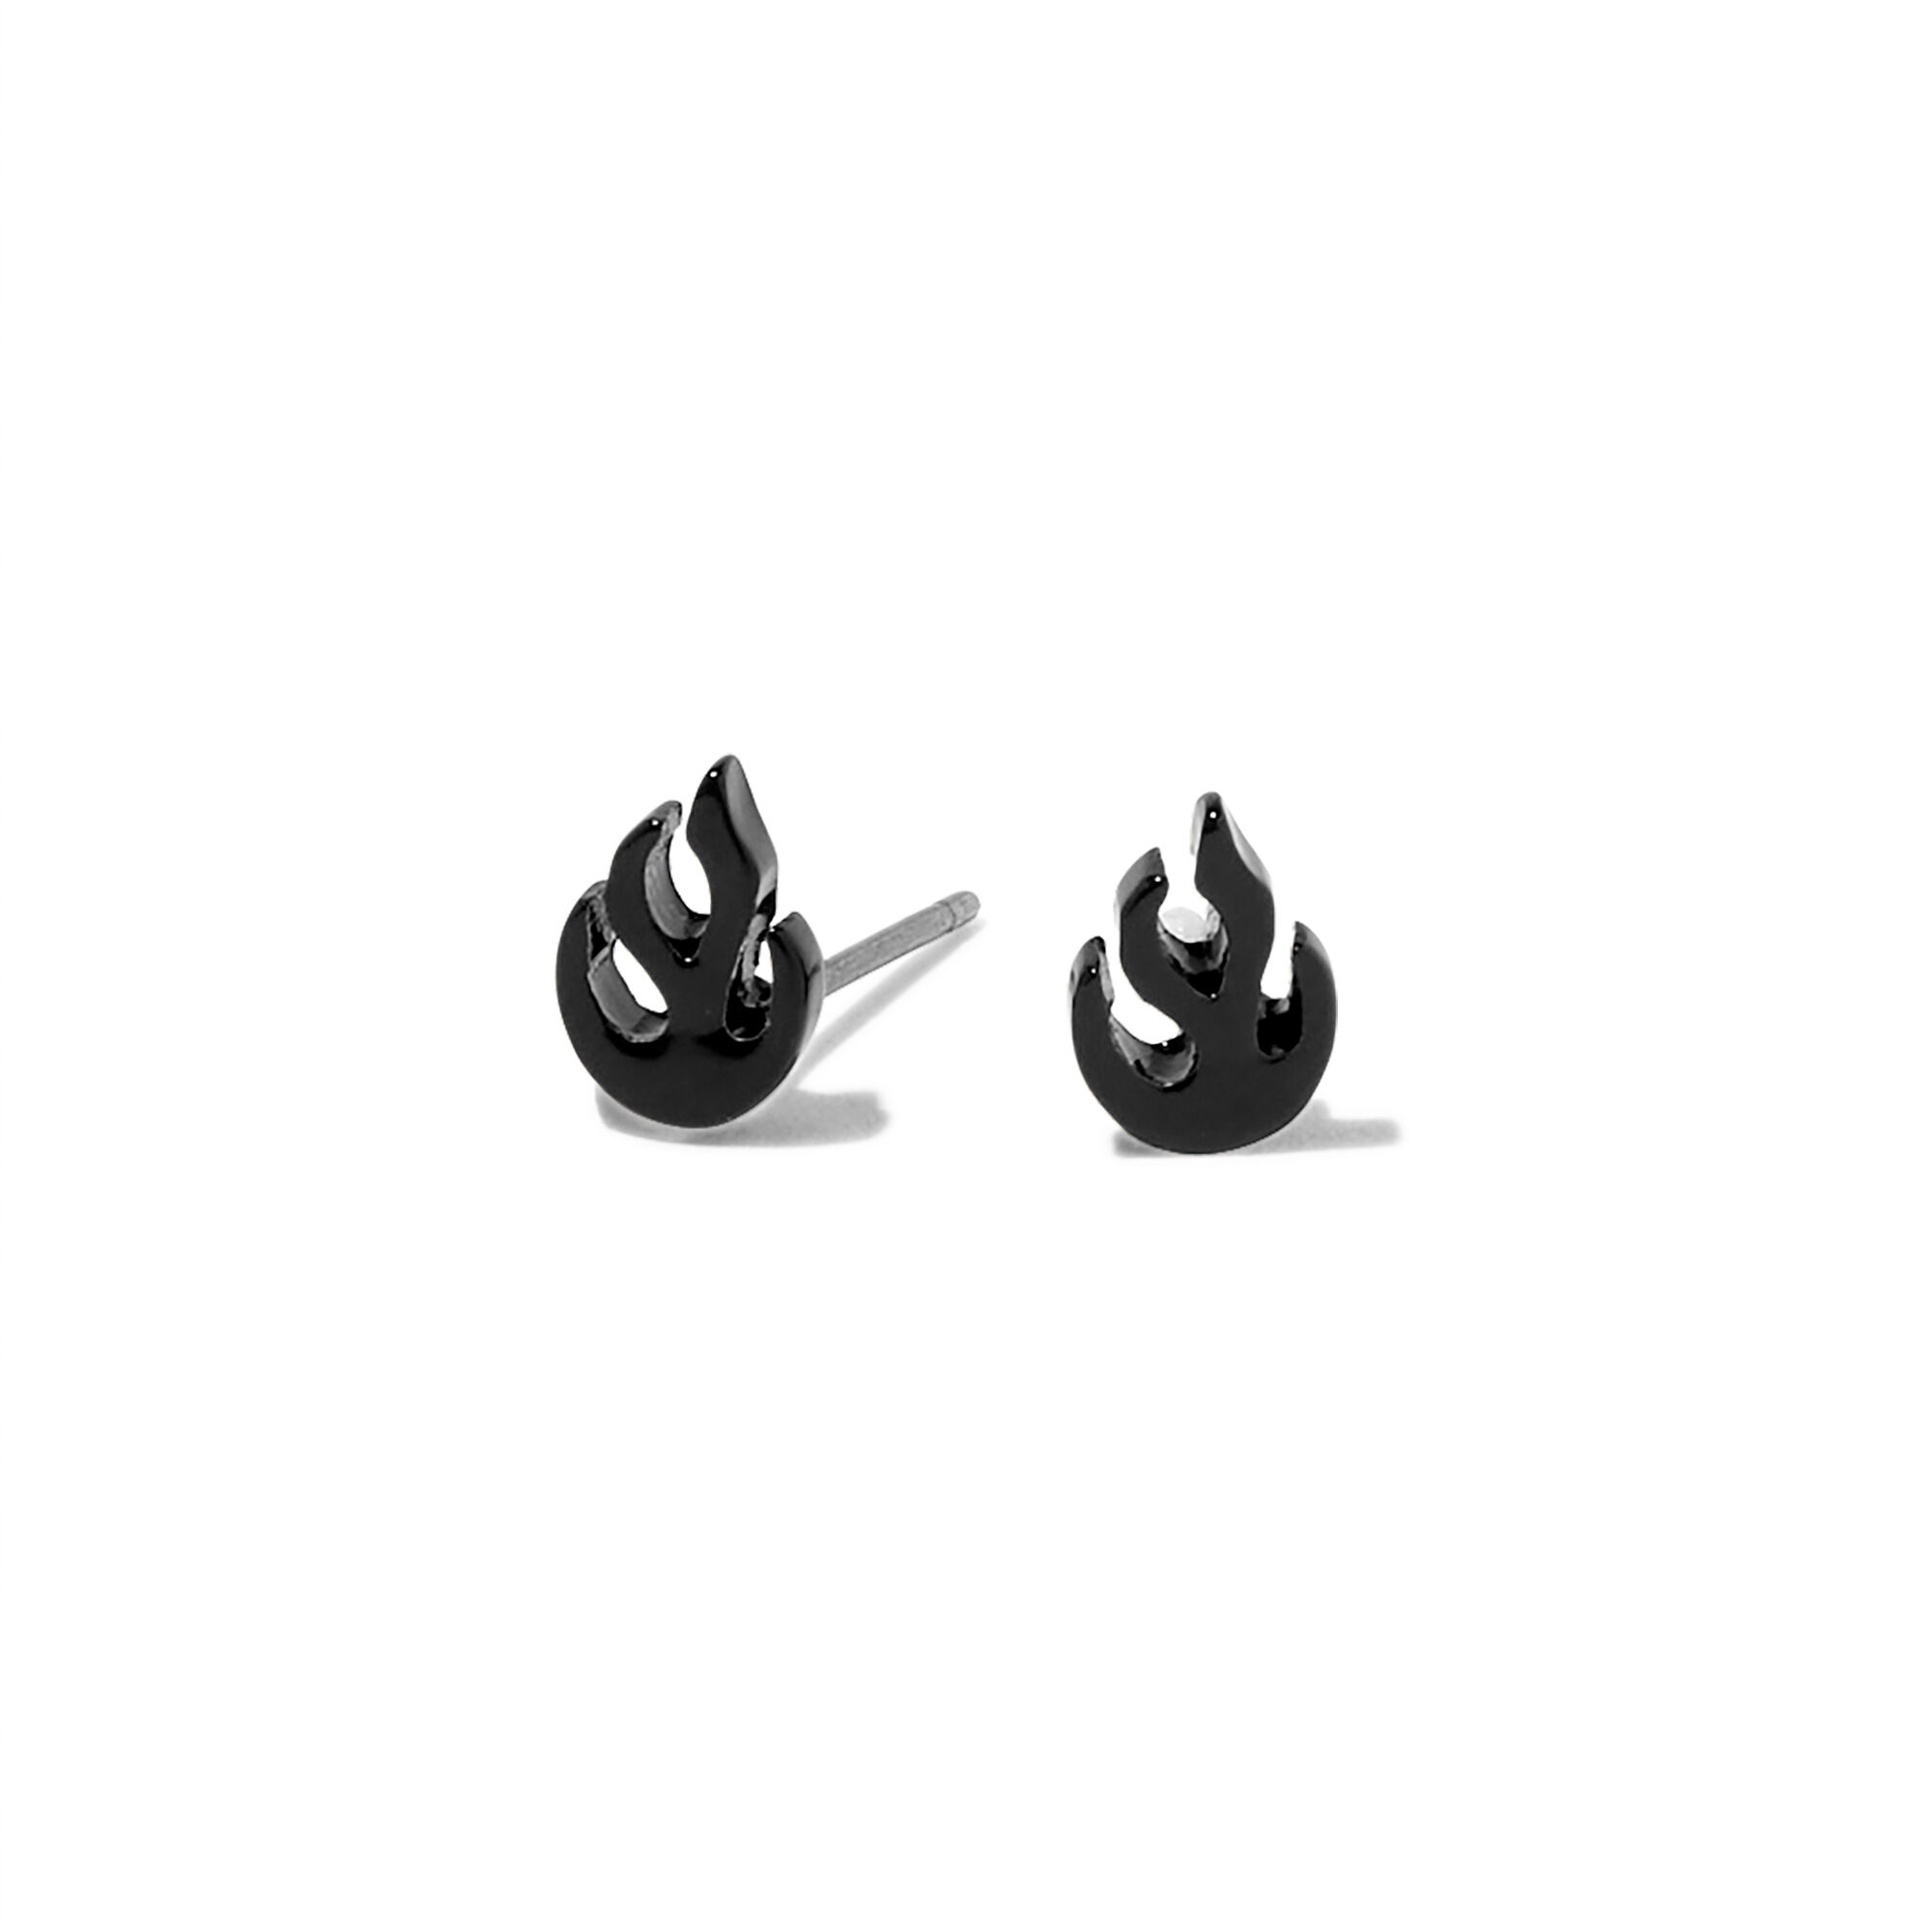 View Claires Flame Stud Earrings Black information